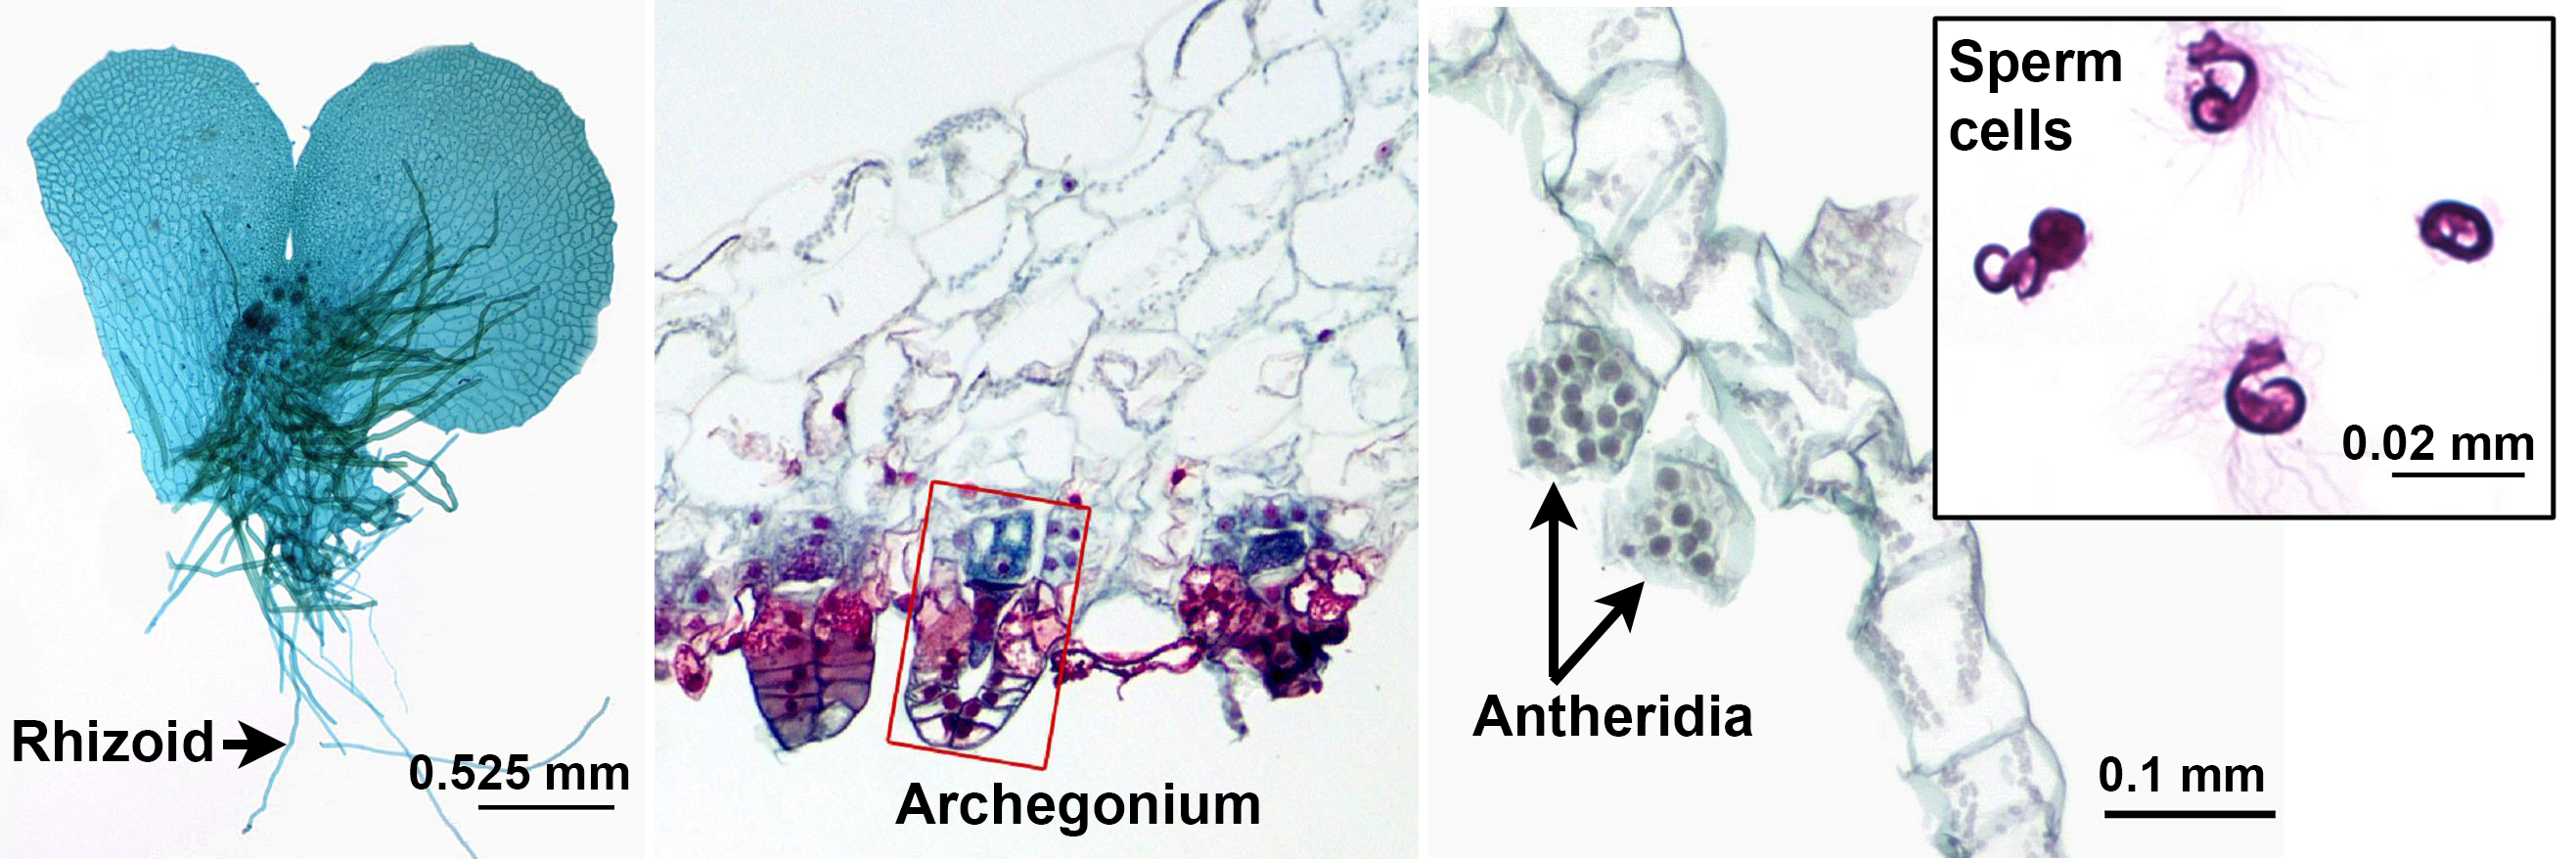 3-Panel figure of gametophyte structures of a fern. Panel 1: Heart-shaped gametophyte. Panel 2: Detail of archegonia. Panel 3: Detail of antheridia. Inset of Panel 3: Mature sperm cells.